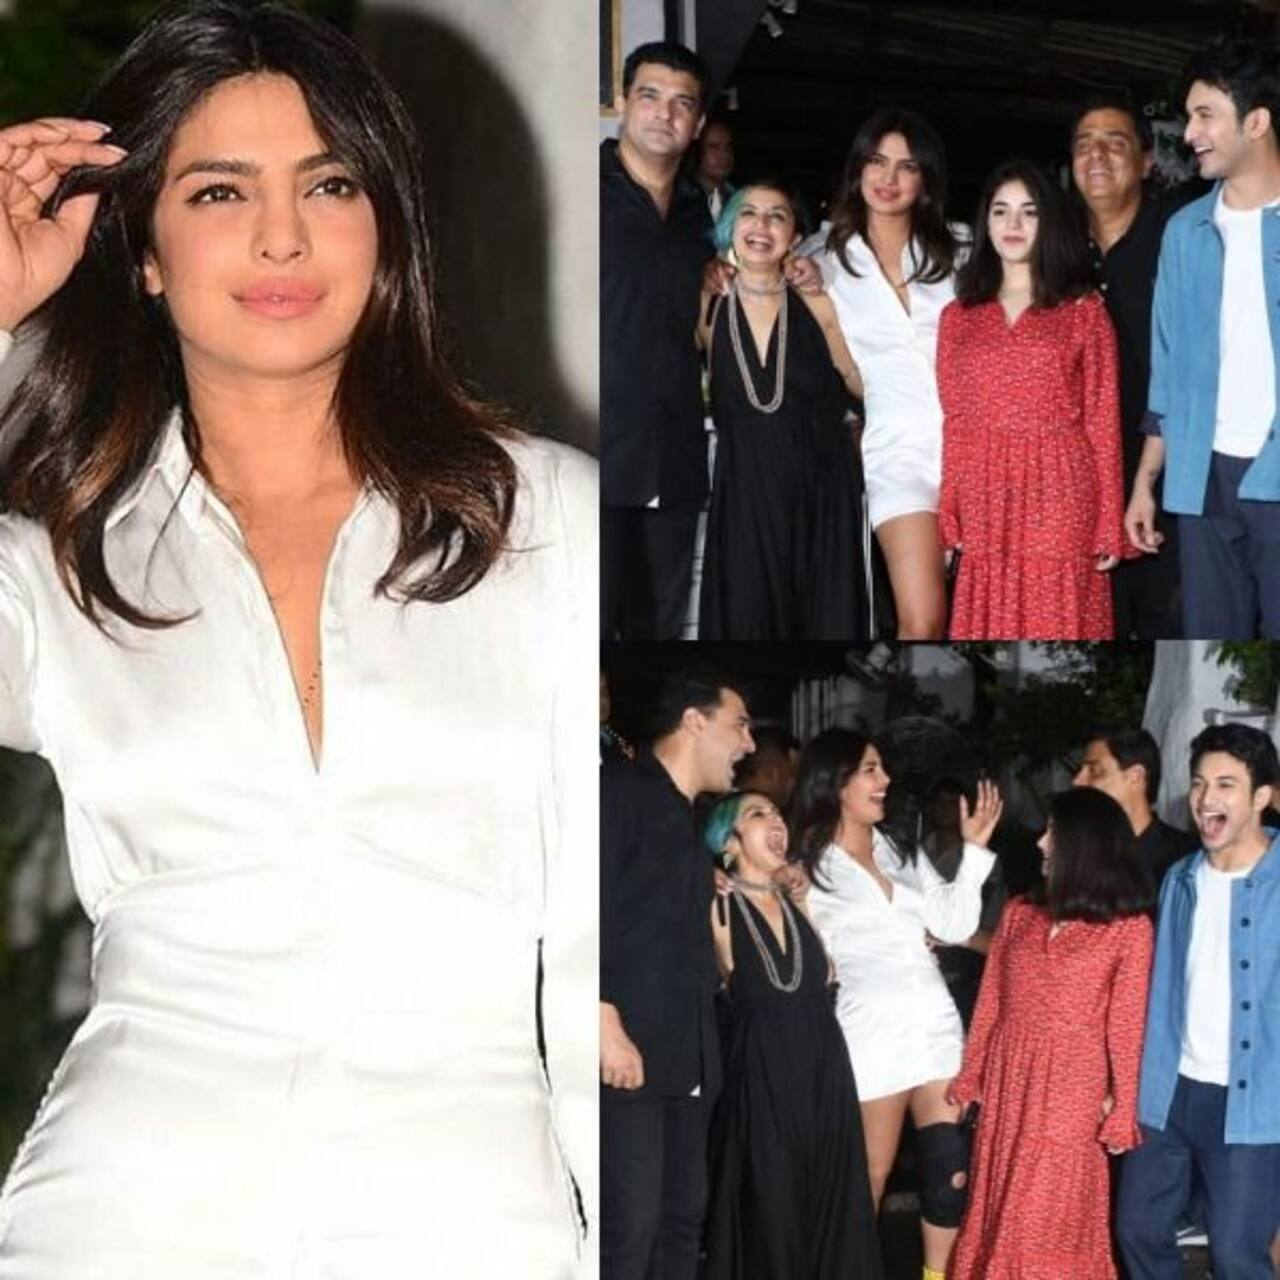 The Sky Is Pink: Priyanka Chopra, Zaira Wasim, Rohit Saraf attend the wrap-up party but we are missing Farhan Akhtar - view pics